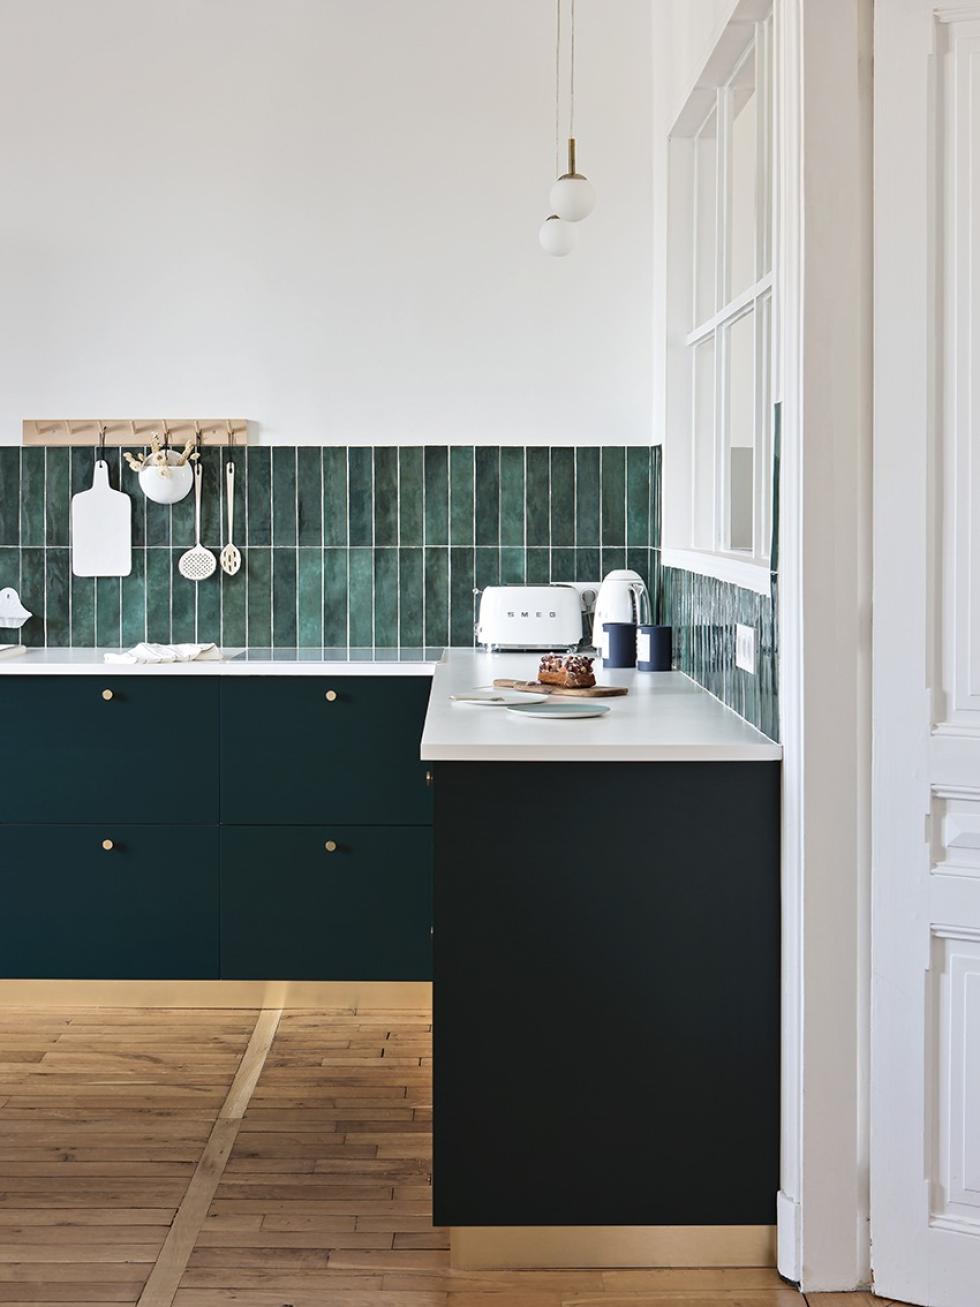 Kitchen in Green 02 - Sombre forest